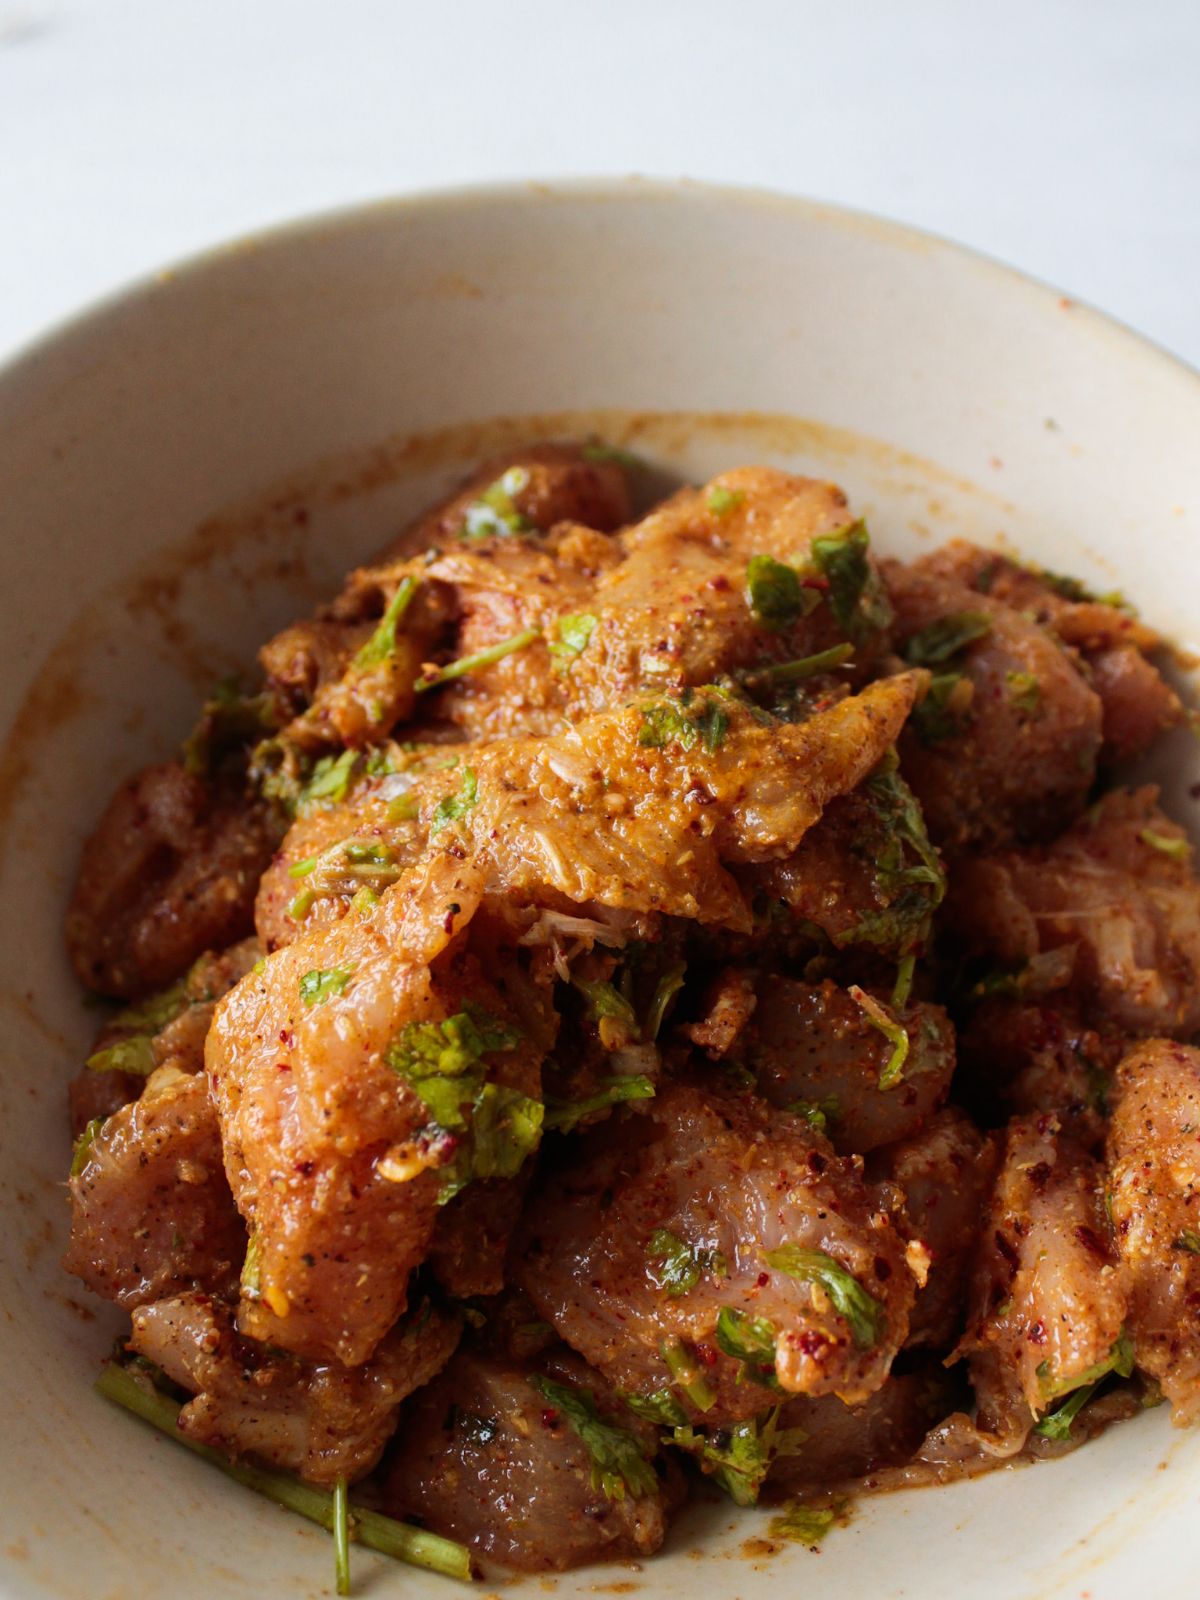 Chicken breasts coated in spices and coriander in large white bowl